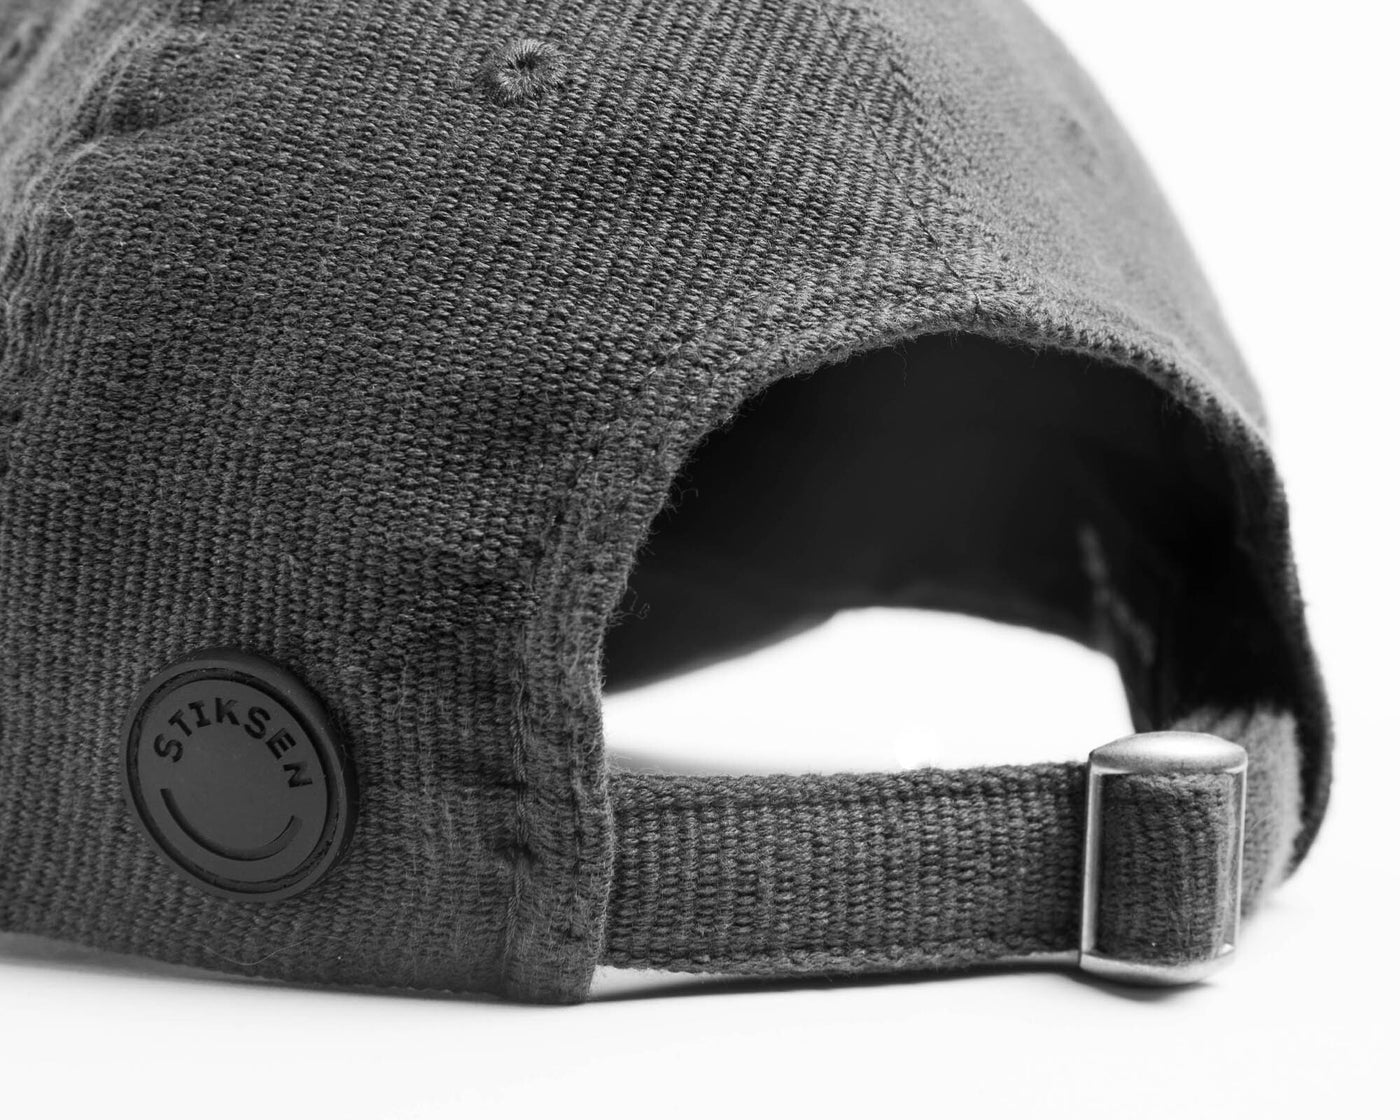 A graphite ninja cap from the NIP X Stiksen merch collaboration, featuring the Ninjas in Pyjamas nickname subtly embroidered on the front. This stylish and adjustable cap is perfect for showcasing your support for NIP in a sleek and trendy way.